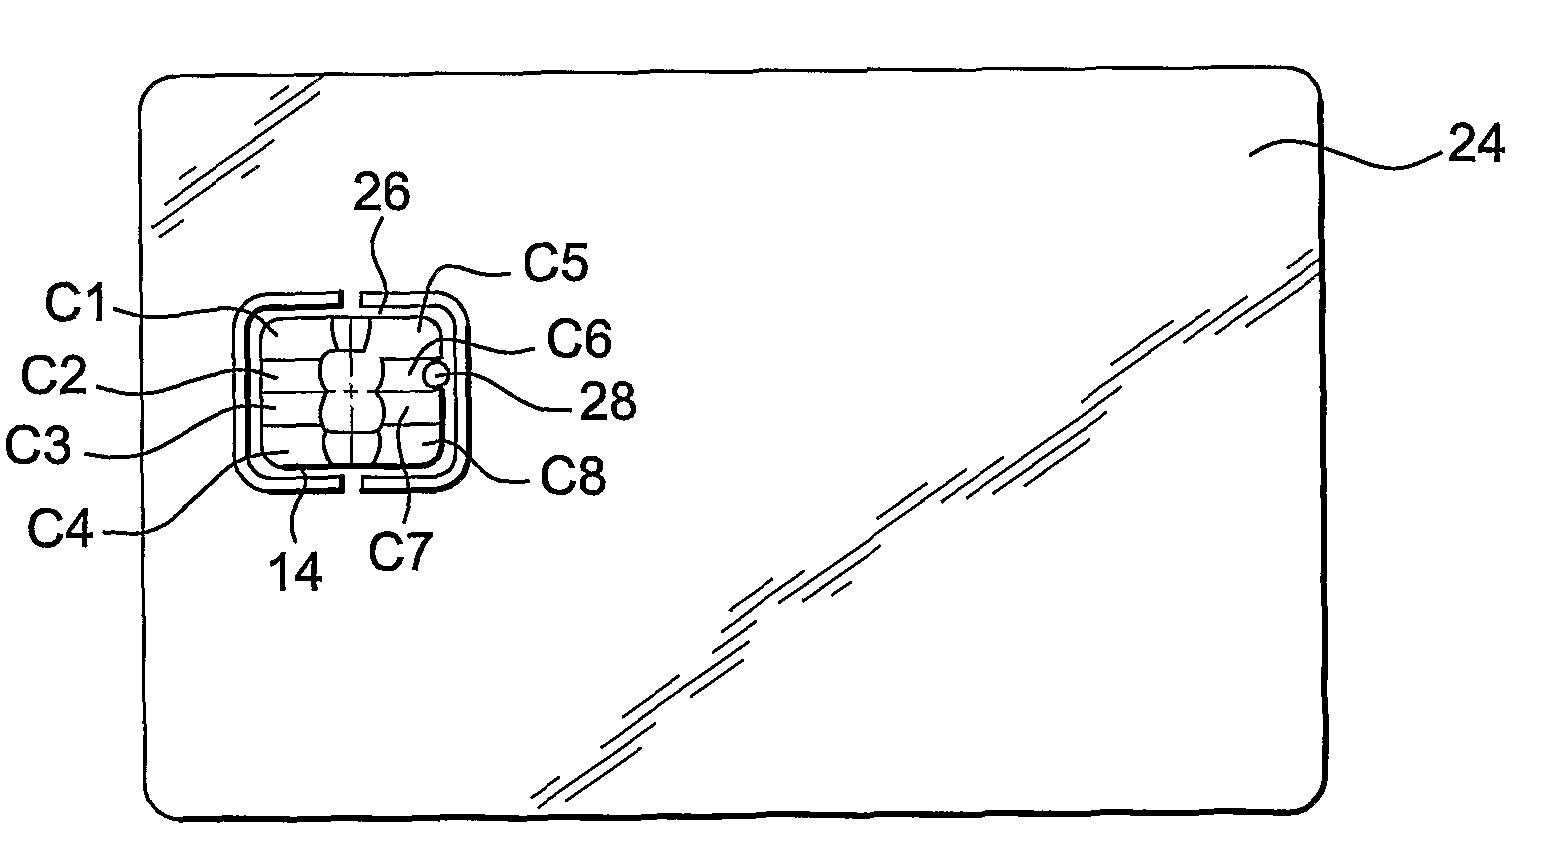 Mini-plug SIM card with improved positioning capability